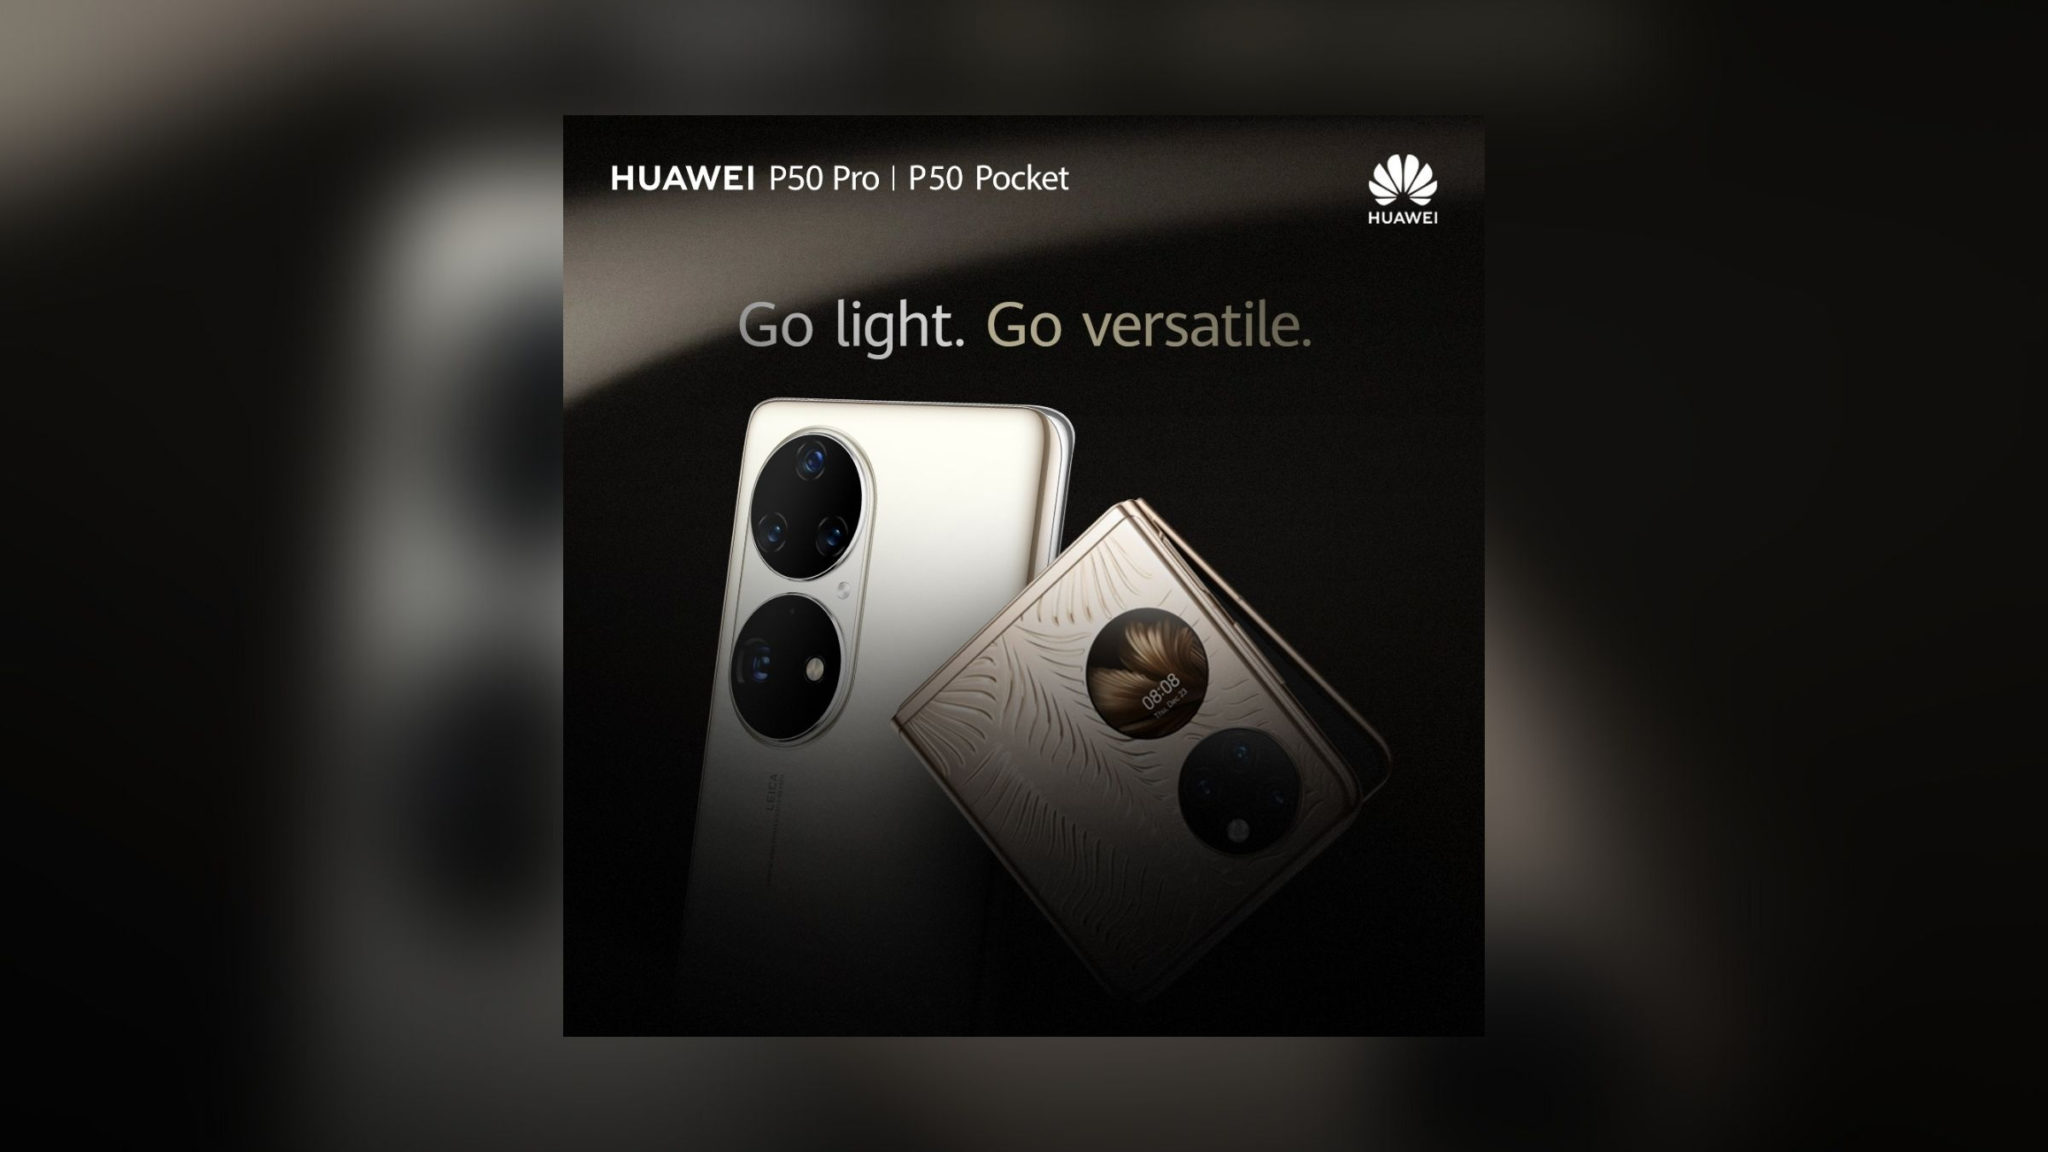 HUAWEI P50 Pro and P50 Pocket Header